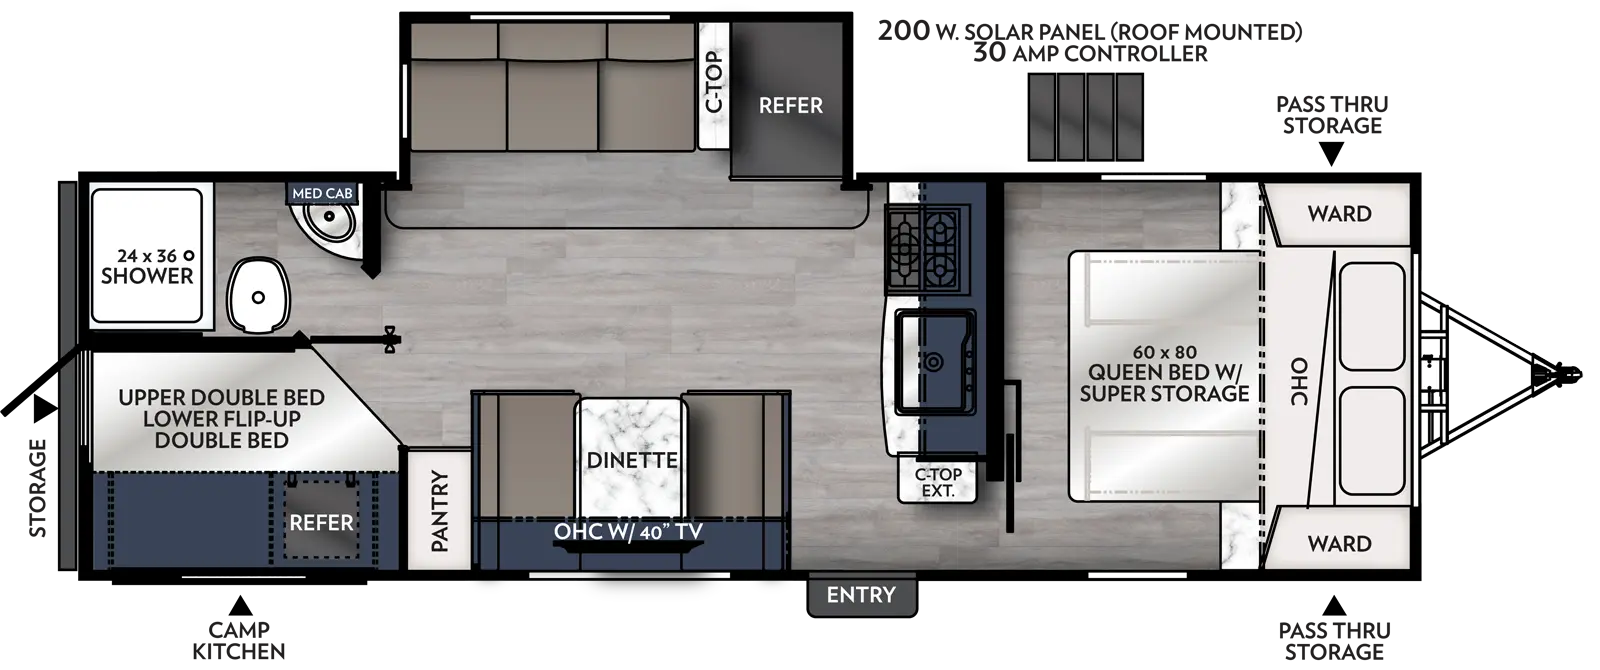 The 256BHS has one slide out on the off-door side and one entry door on the door side. Interior layout from front to back: front bedroom with foot facing queen bed, super storage under bed, overhead cabinet, and wardrobes on either side of the bed; Kitchen containing cook top stove, microwave overhead, sink, overhead cabinet, and countertop extension; off-door side slide out containing refrigerator, countertop, and sofa; Door side dinette with television and cabinets overhead, next to pantry; Off-door side rear bathroom; and door side rear double bed over flip up double bed bunk beds. Outside camp kitchen containing a mini refrigerator. 